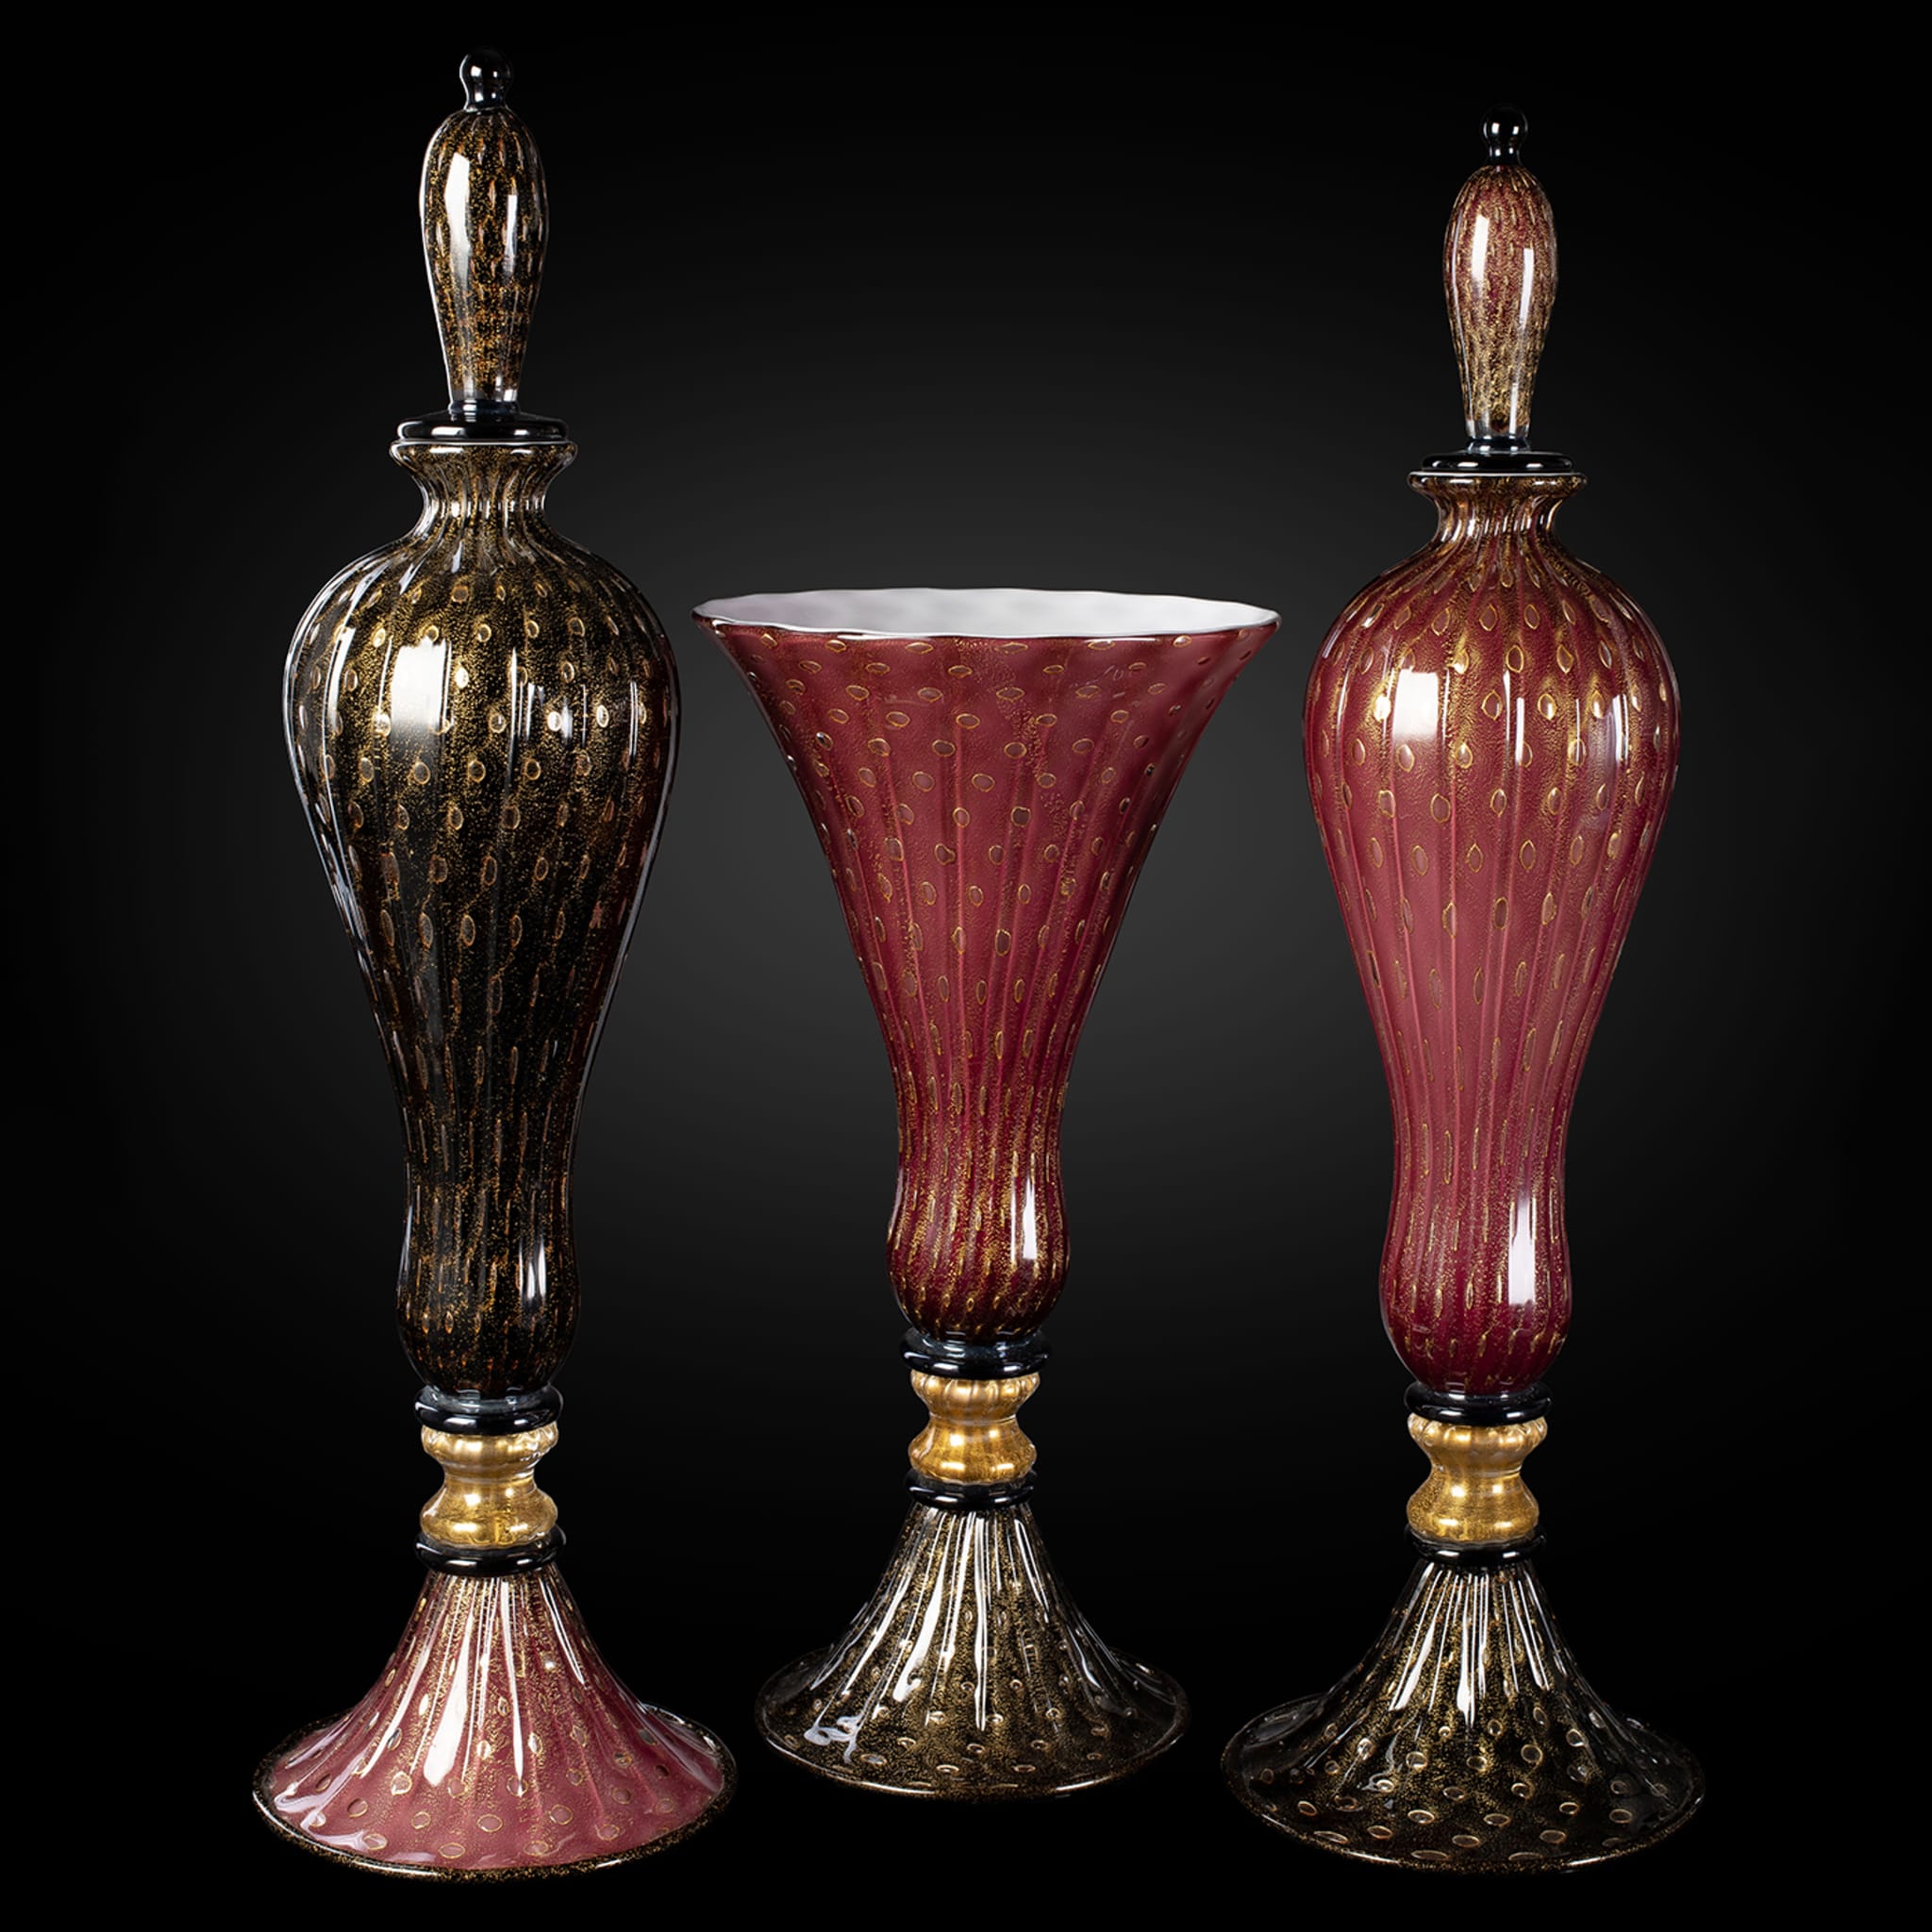 Stmtrub Ruby & Gold Footed Vase - Alternative view 2